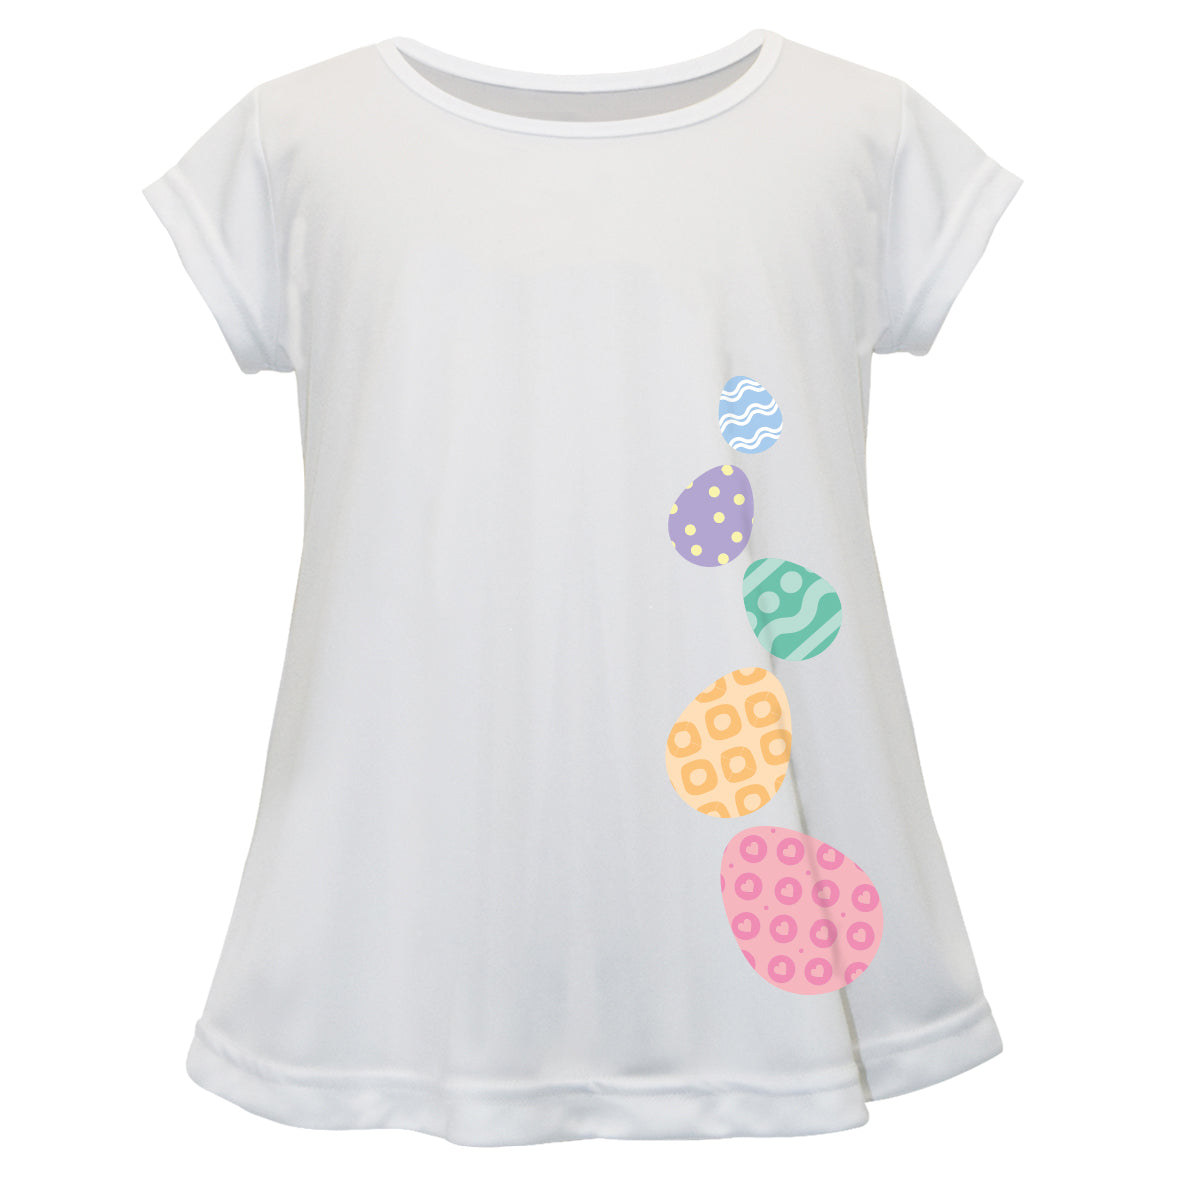 Eggs Name White Short Sleeve Laurie Top - Wimziy&Co.